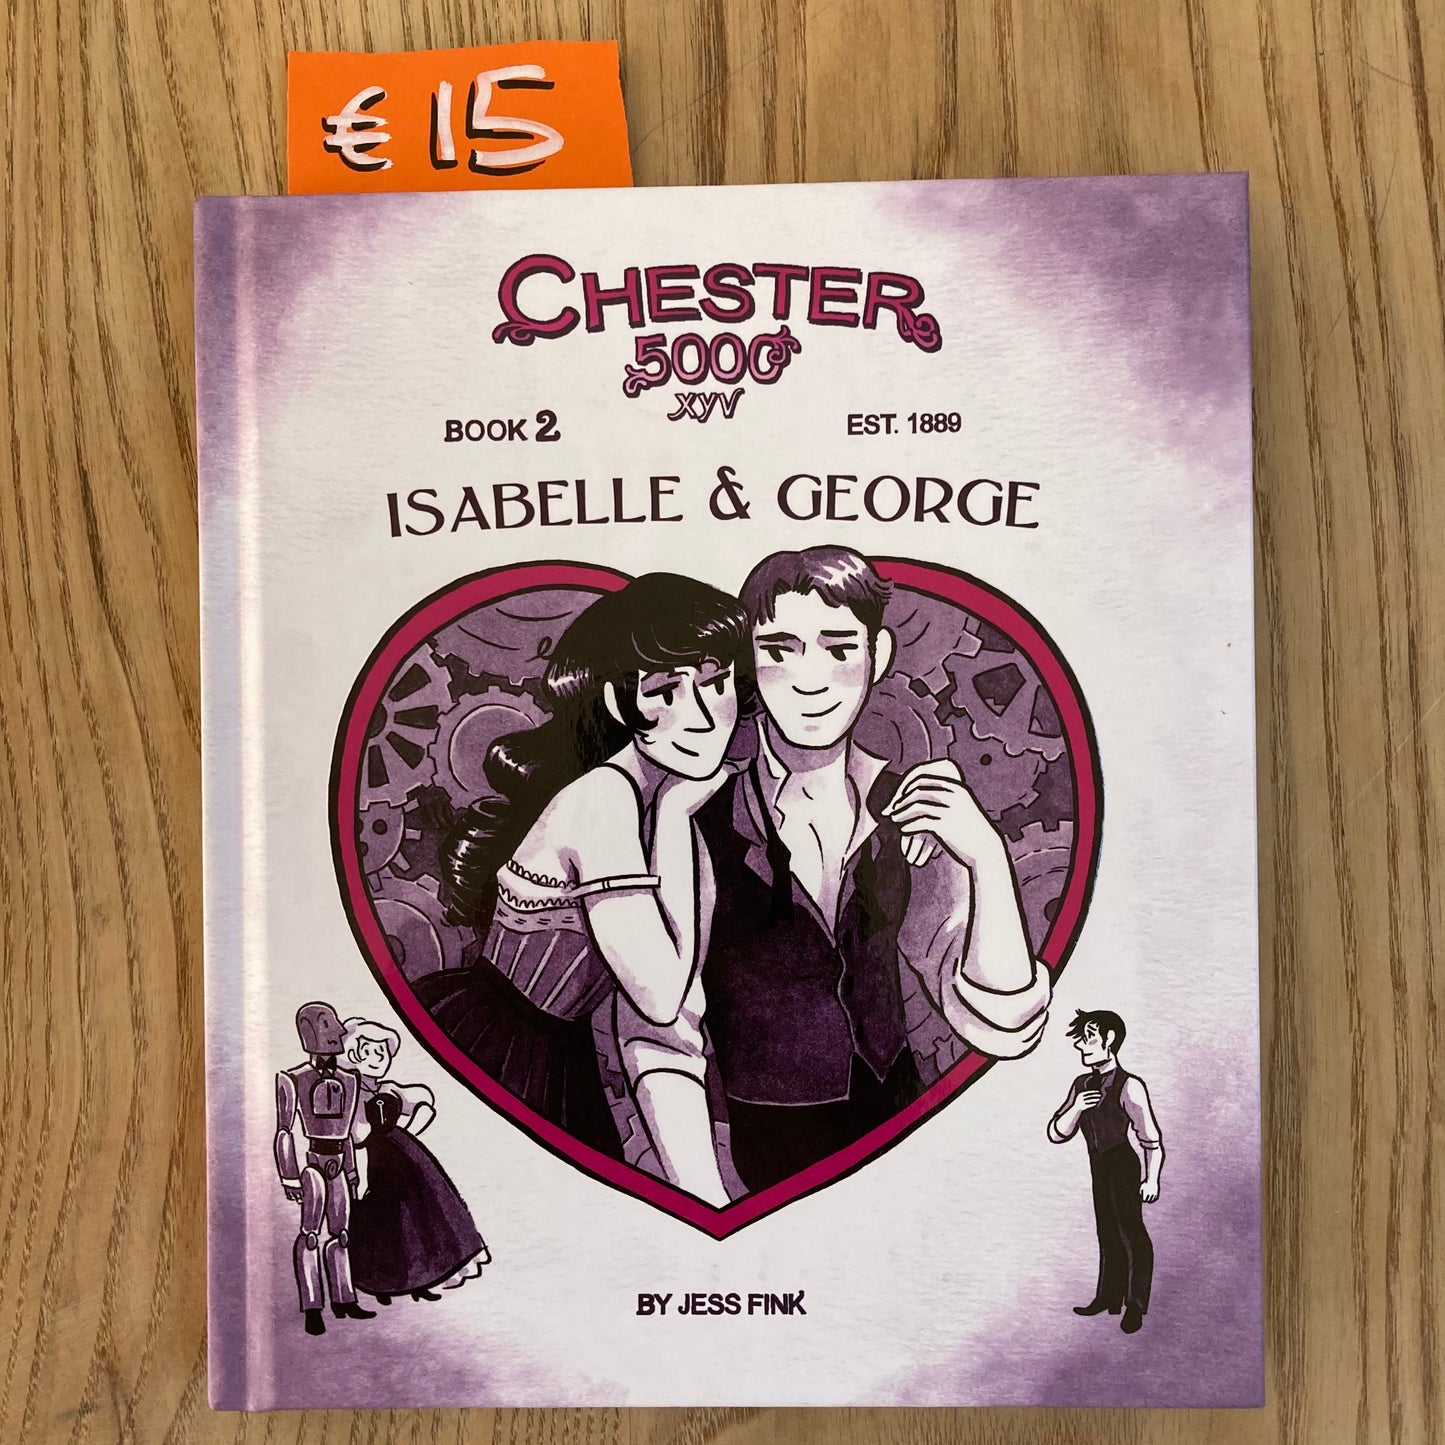 Chester 5000 XYV, Book 2: Isabelle & George